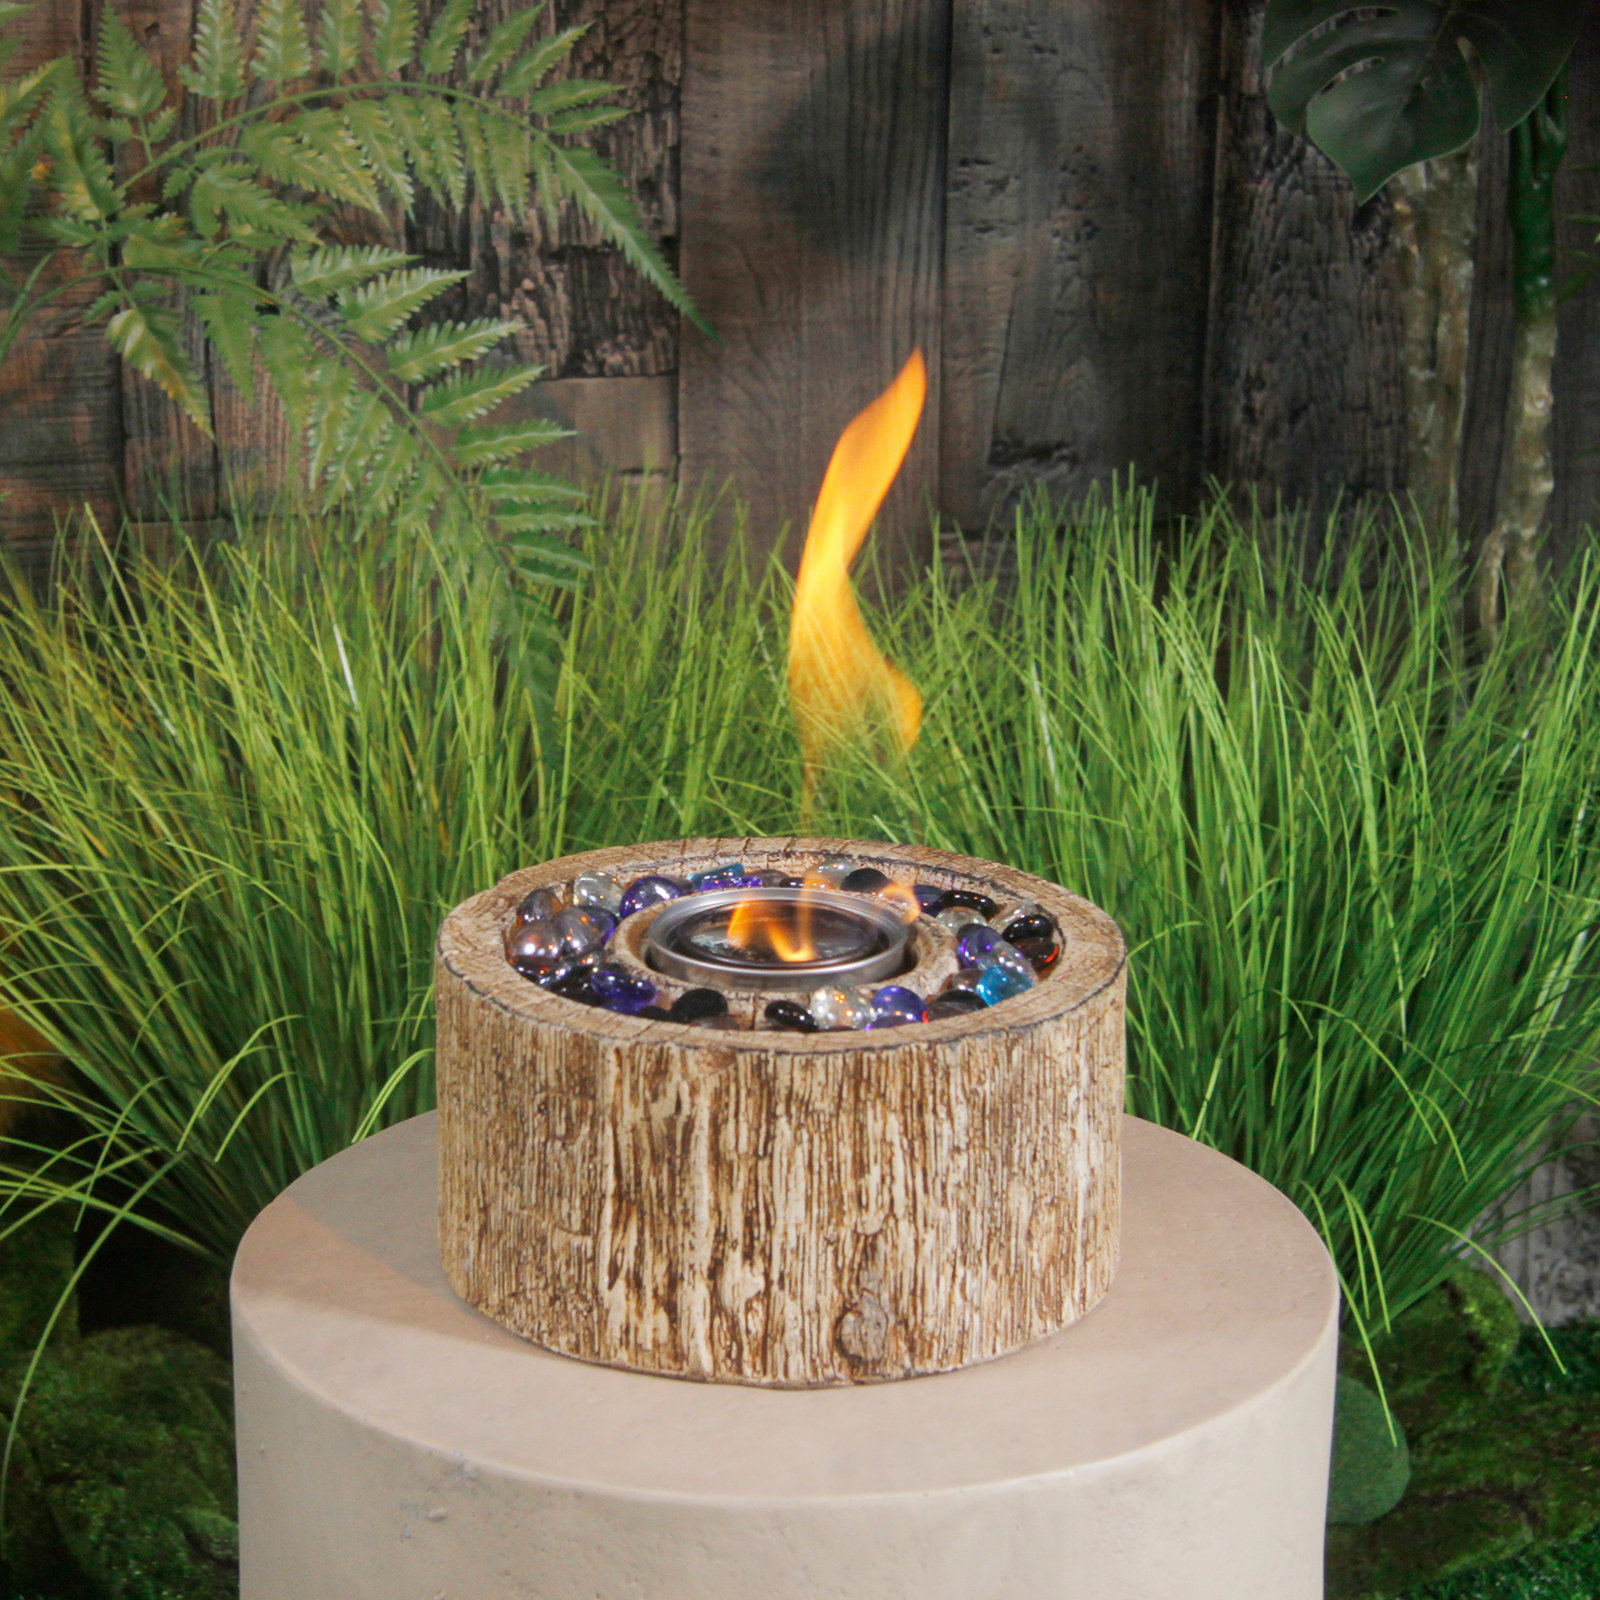 TURBRO Retro Cement Tabletop Fire Pit for Outdoor, Ventless Fire Bowl,  Odorless, Smokeless, Fueled by Ethanol Alcohol